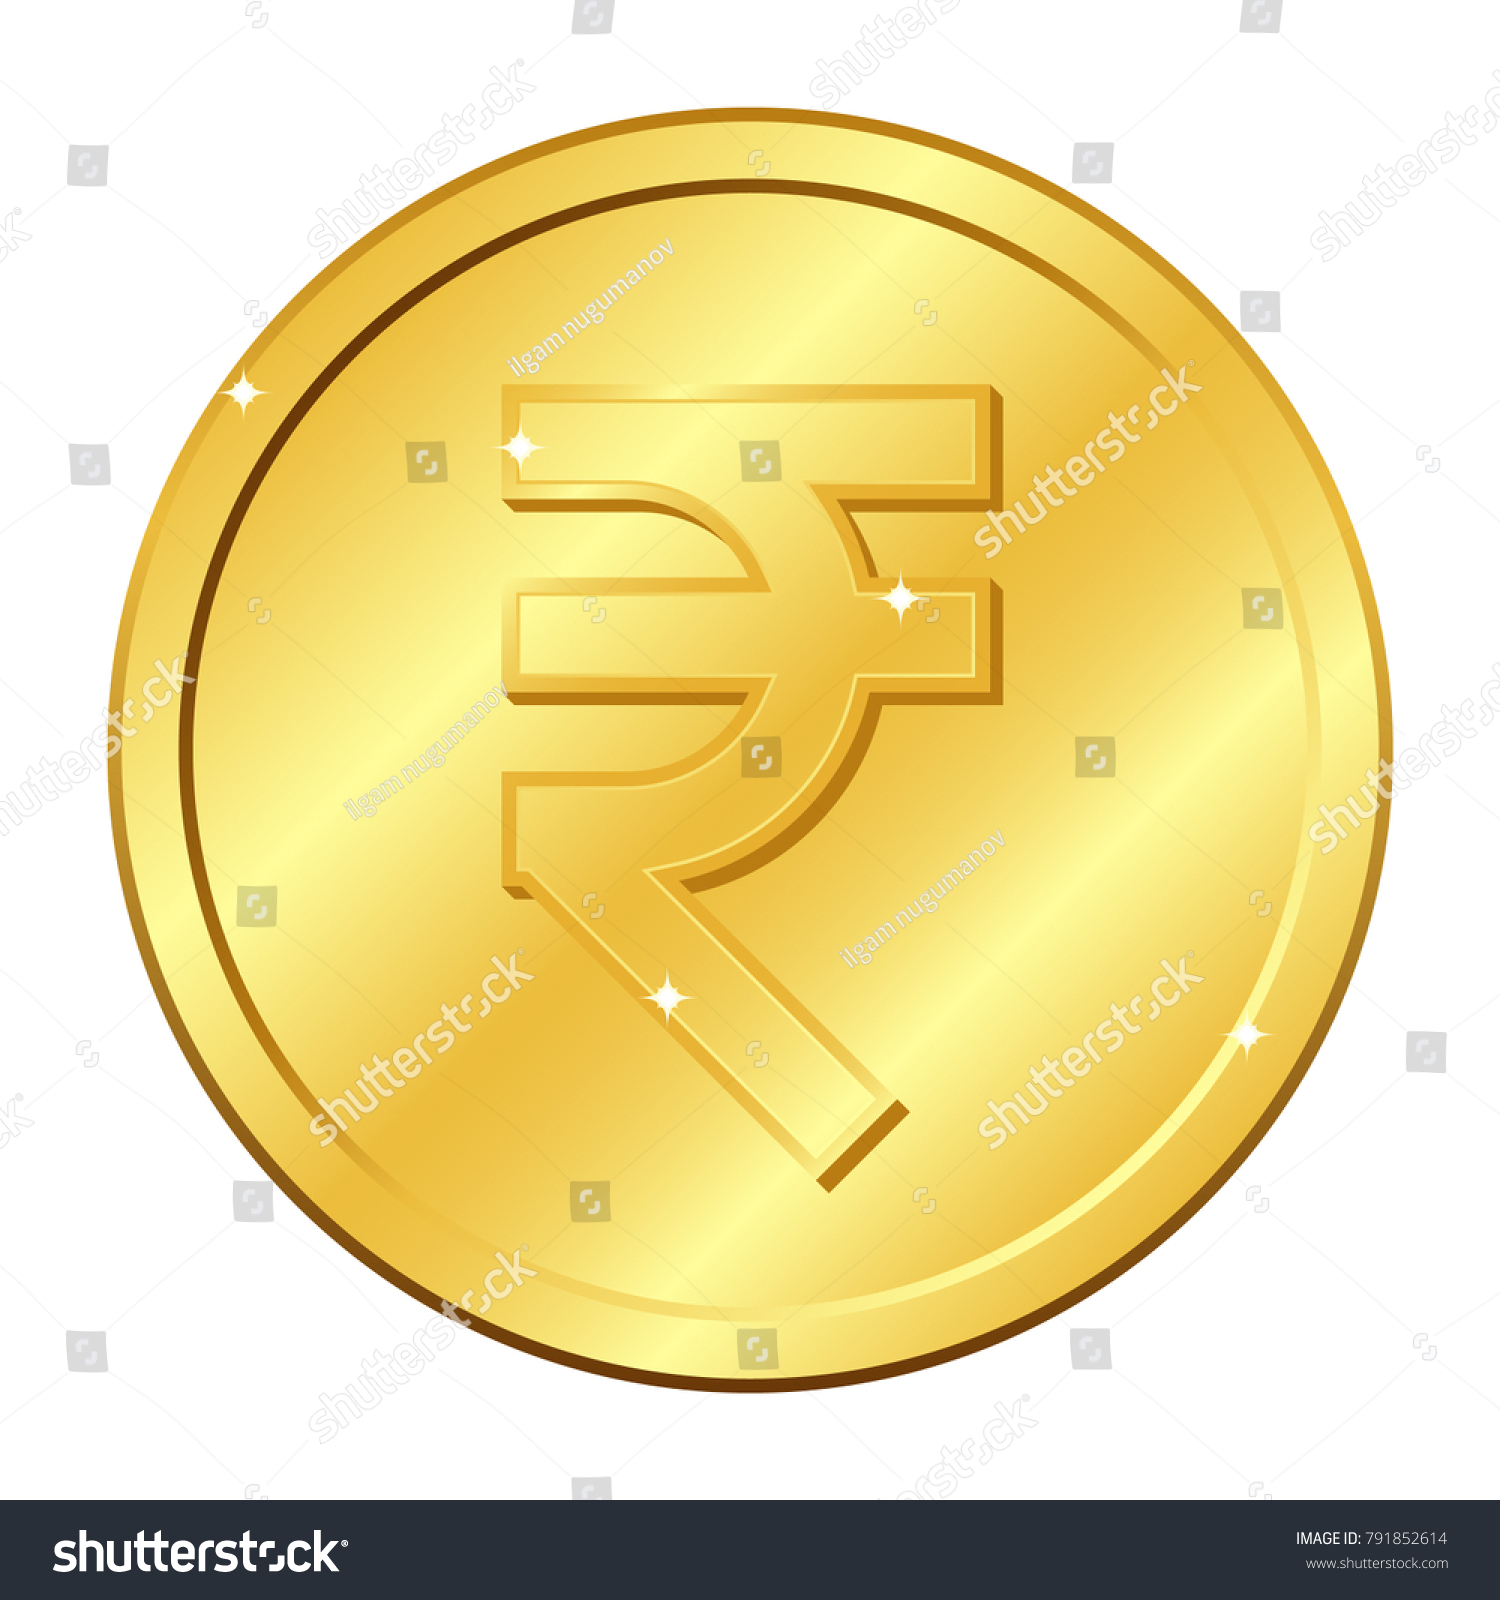 SVG of Rupee currency gold coin. Indian currency. Vector illustration isolated on white background. Editable elements and glare. Suitable for casino game. Rich EPS 10 svg